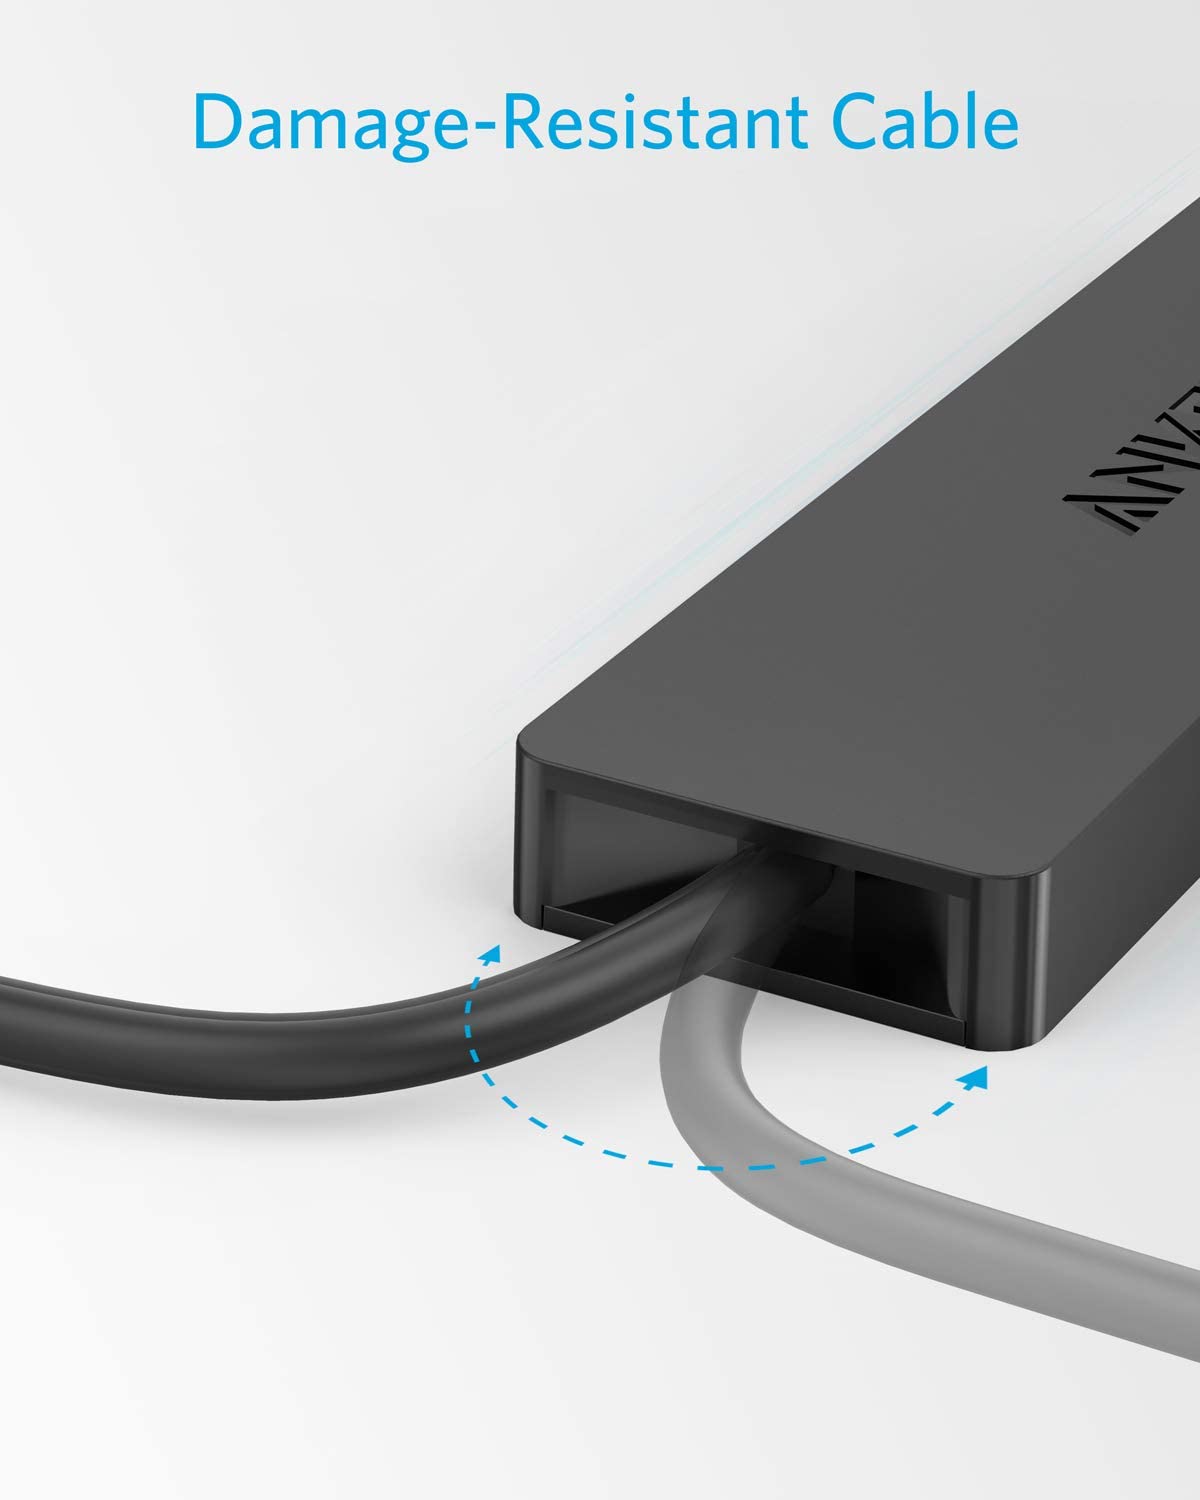 Anker 4-Port USB 3.0 Hub with 2 ft Extended Cable